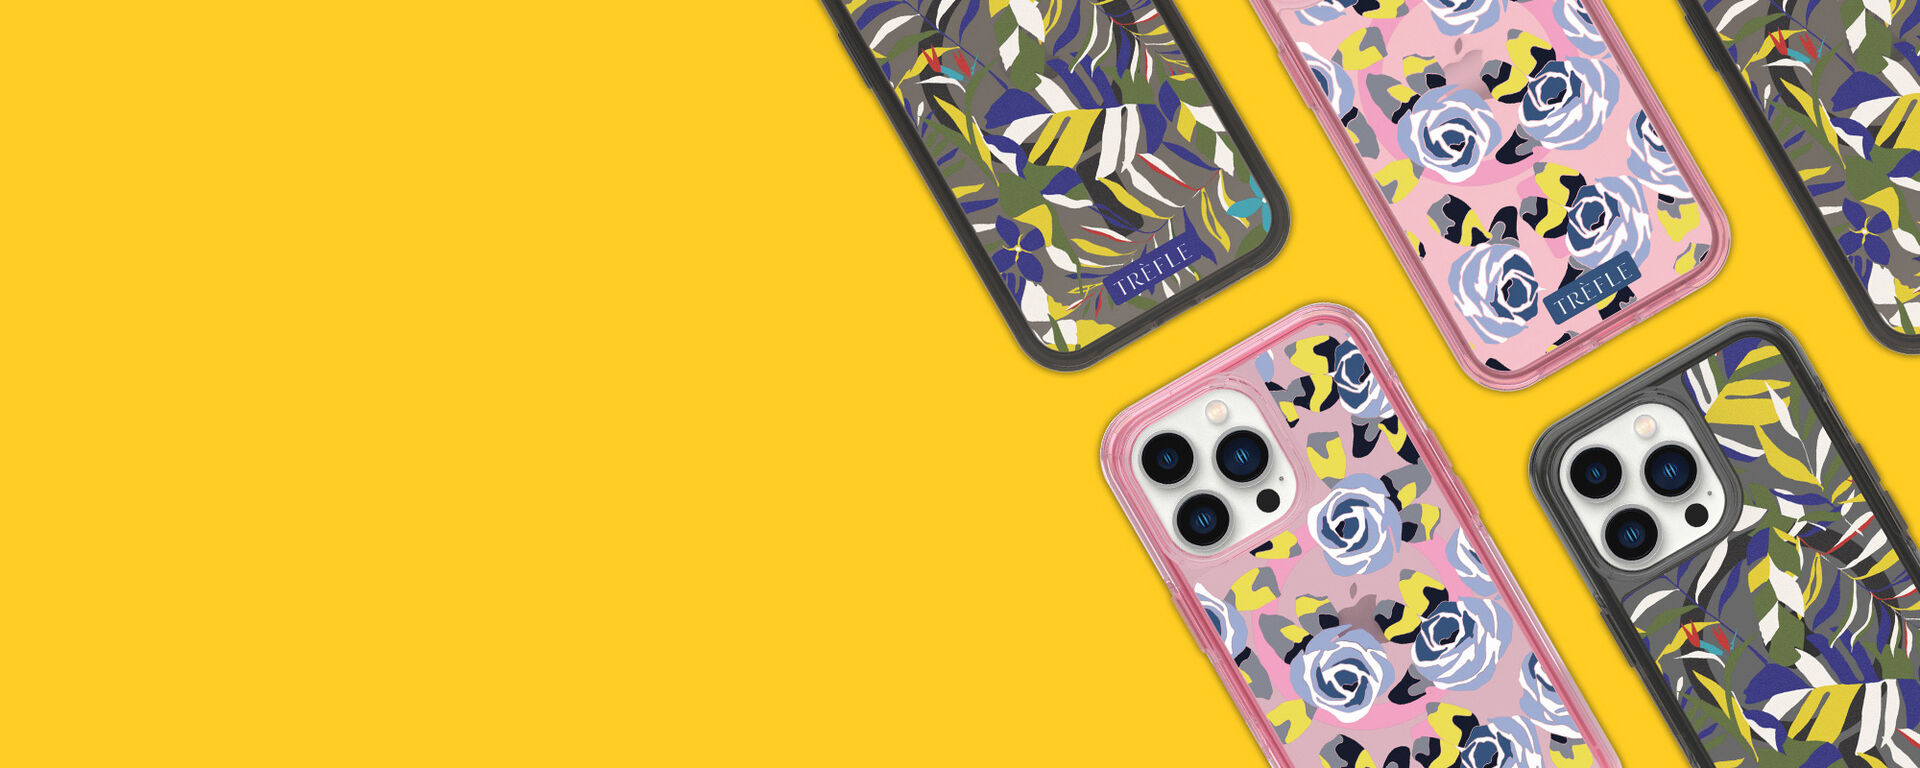 Rose graphic and leaf graphic iPhone cases